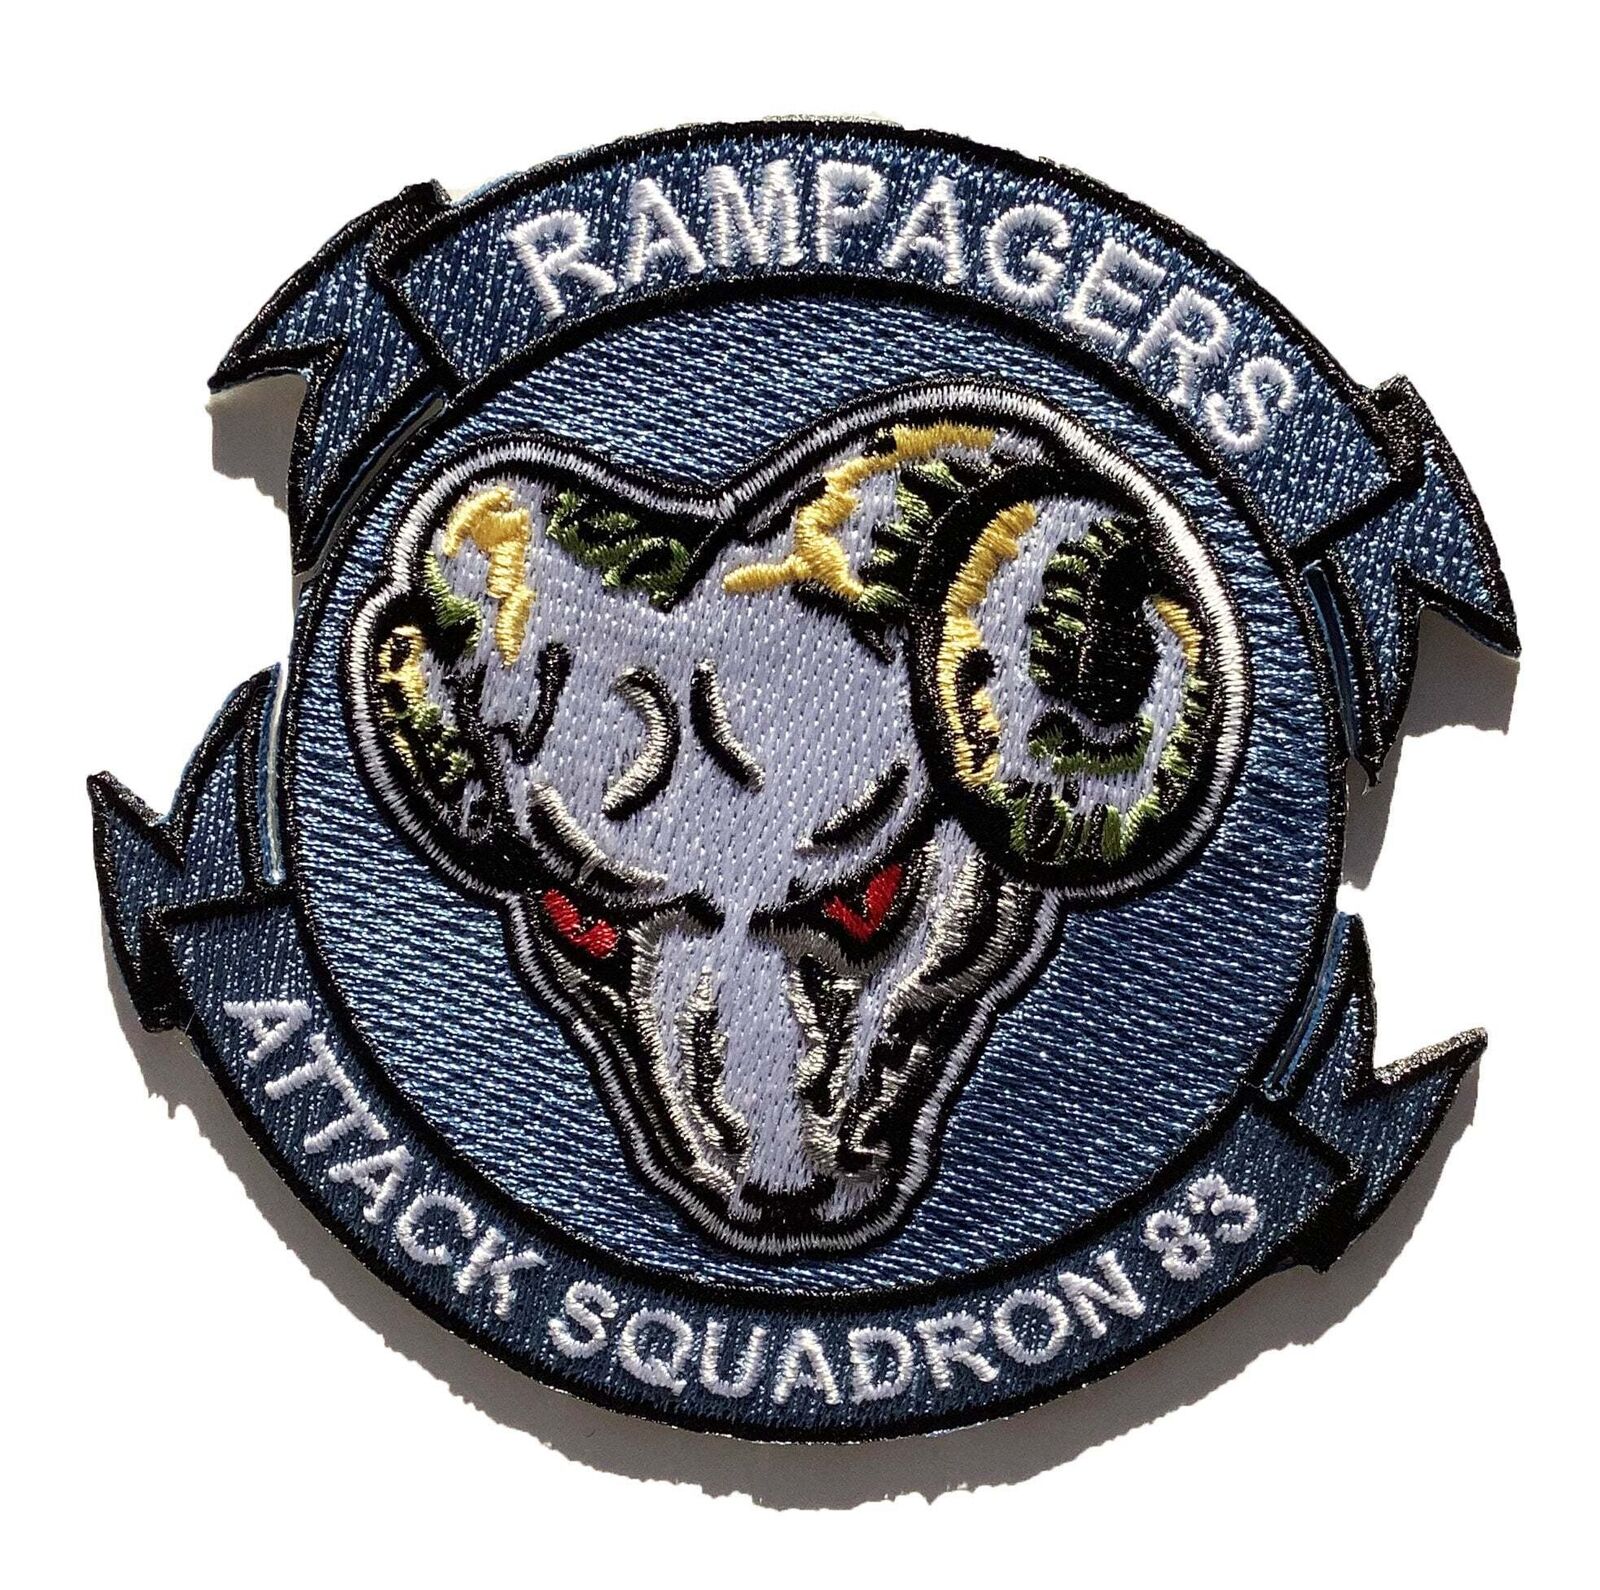 VA-83 Rampagers Squadron Patch – Sew On